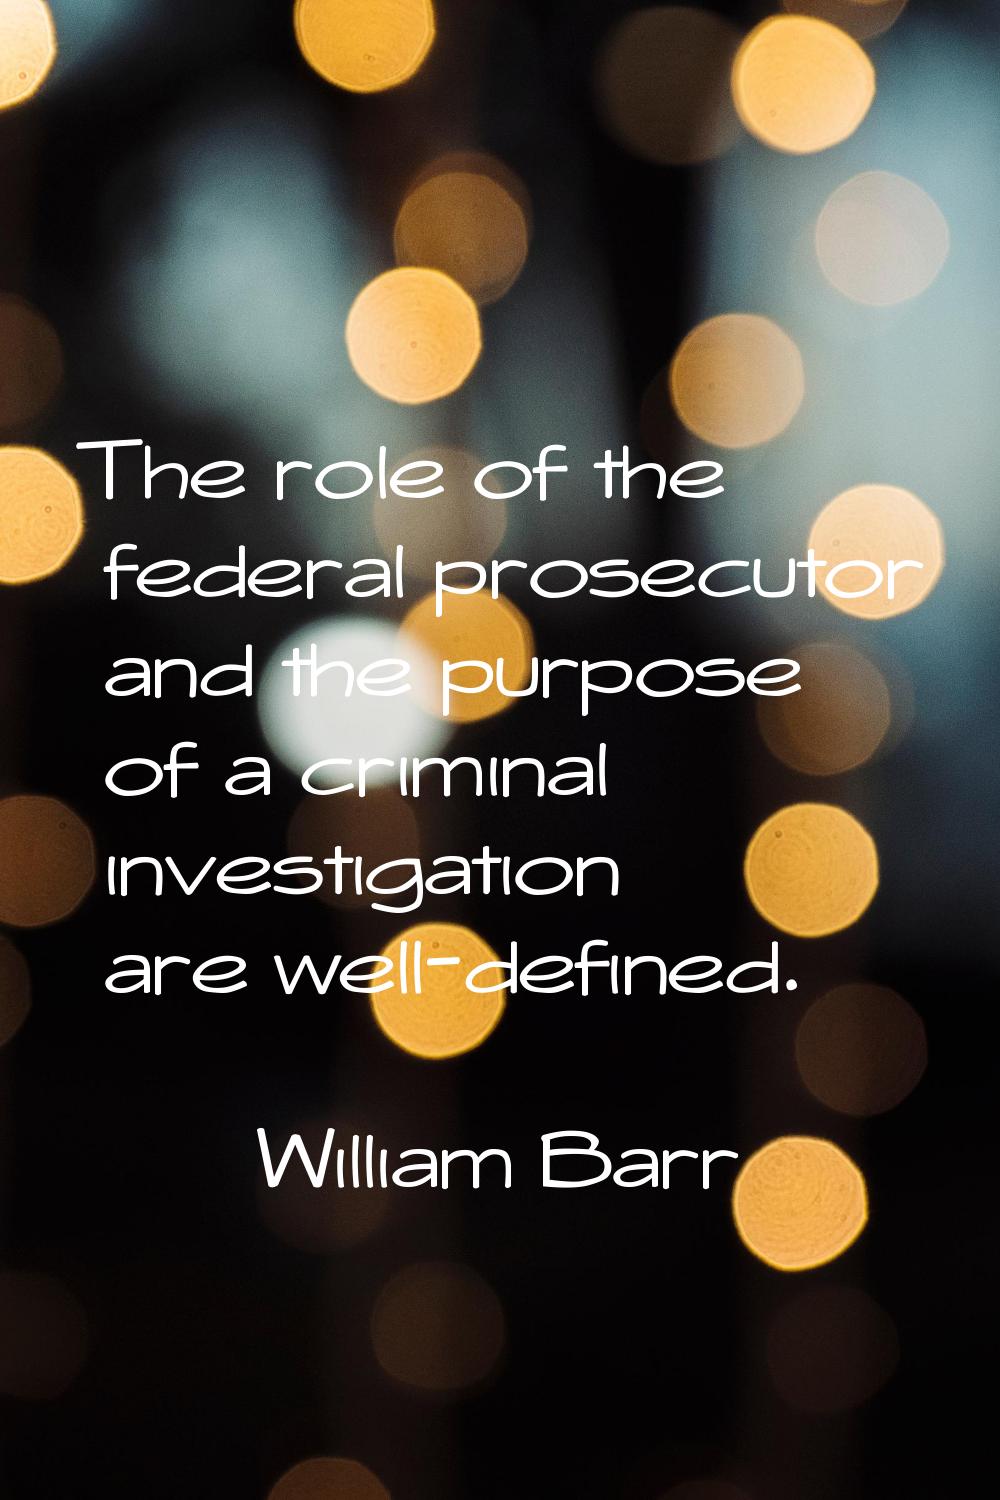 The role of the federal prosecutor and the purpose of a criminal investigation are well-defined.